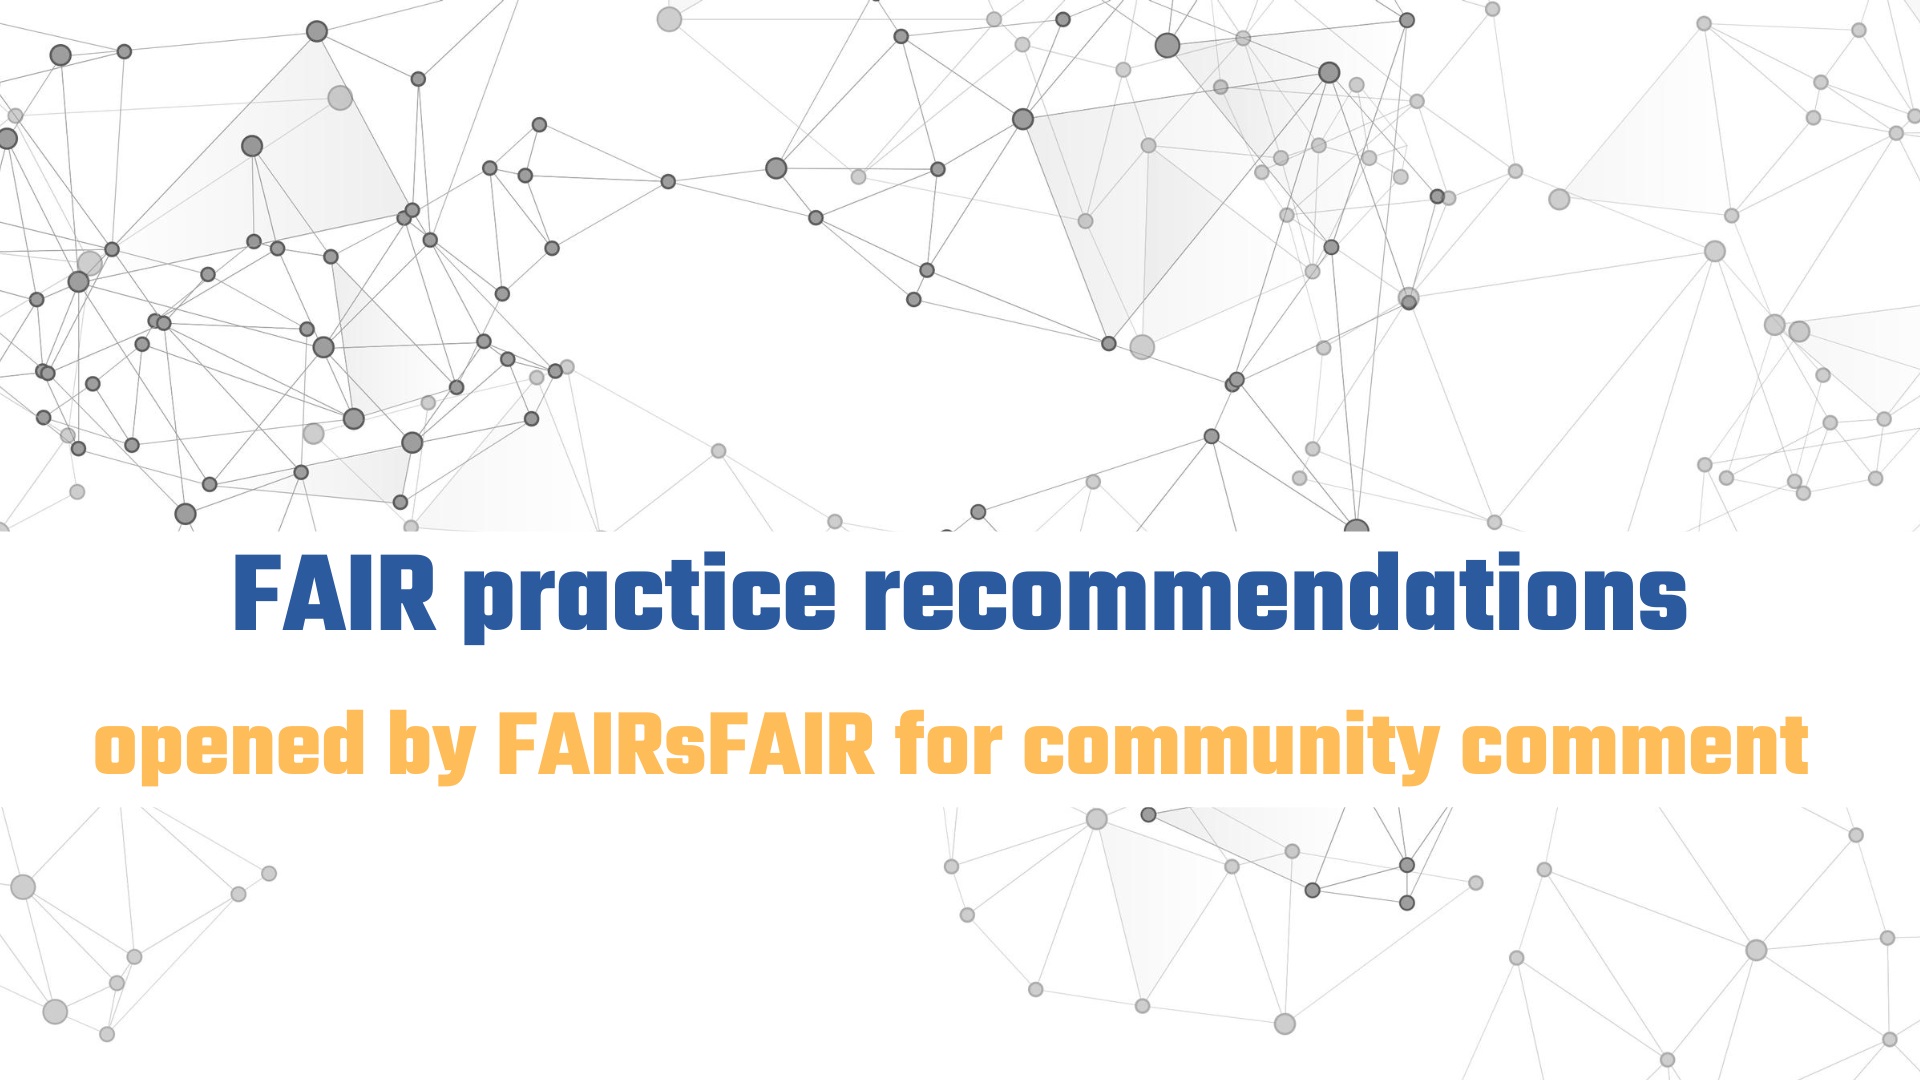 FAIR practice recommendations opened by FAIRsFAIR for community comment